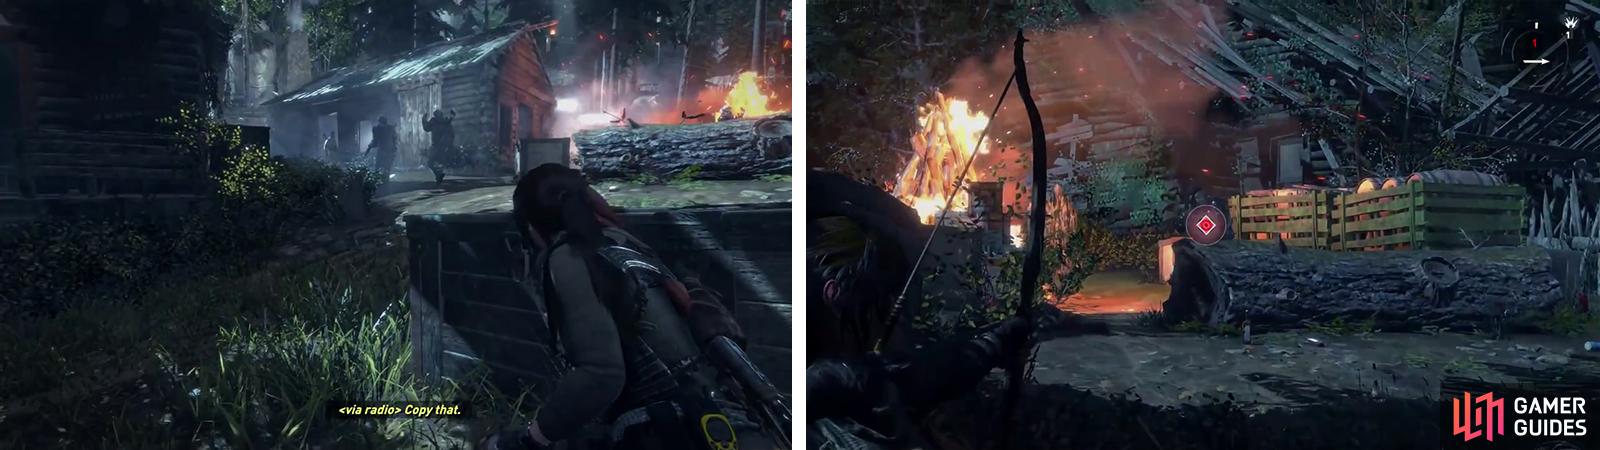 Wait for the patrollers to move left and hit them with a Poison Arrow (left) before taking out the other enemies either stealthily or with your weapons (right).